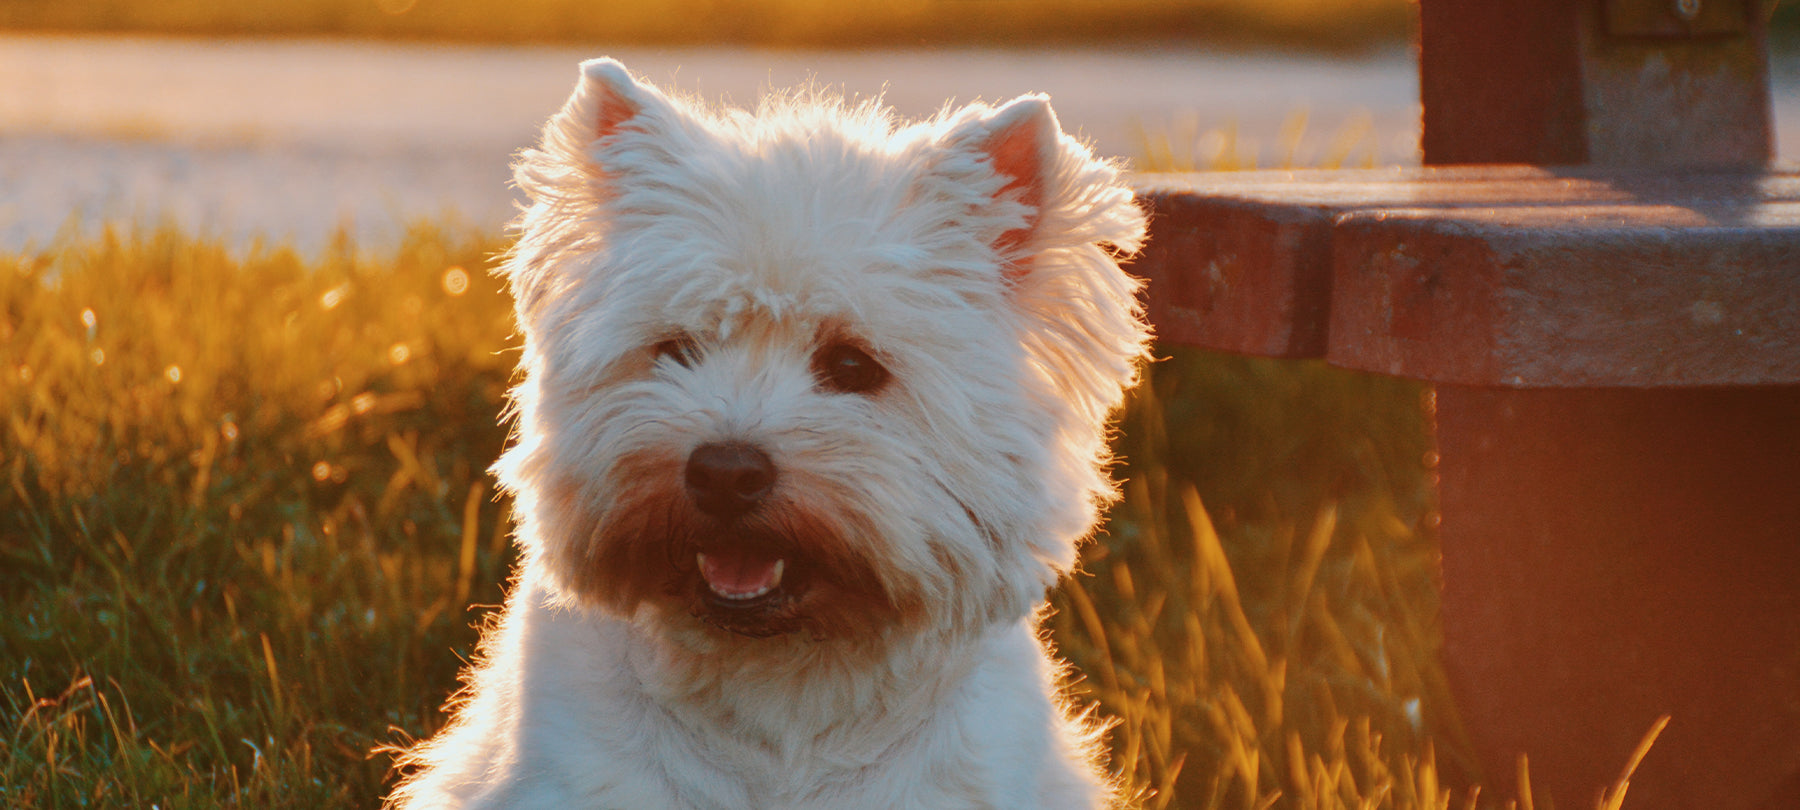 Small white dog in sunset.